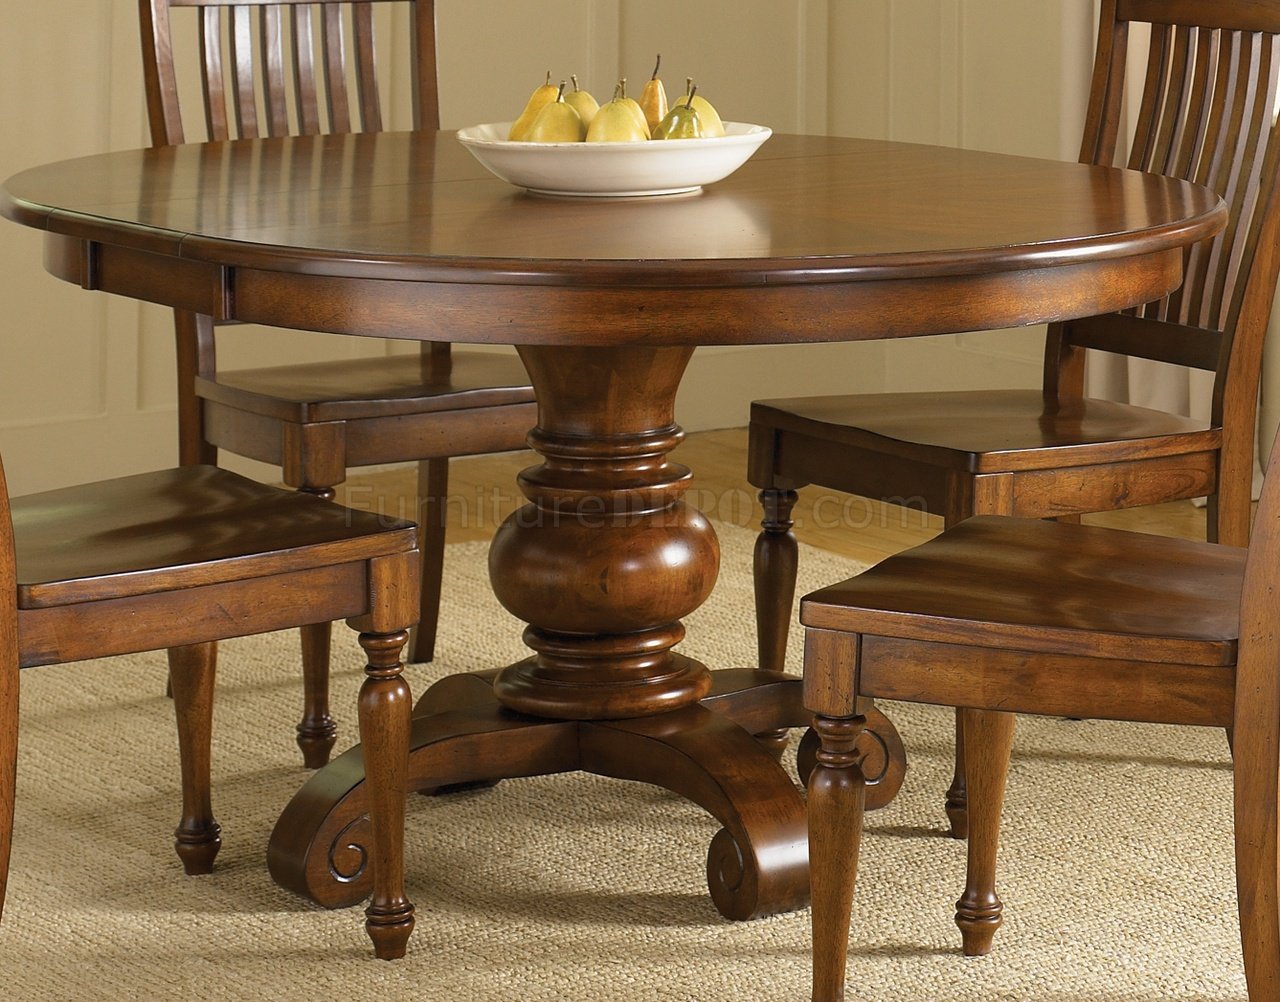 Chestnut Finish Dining Room Round, Round Pedestal Kitchen Table And Chairs